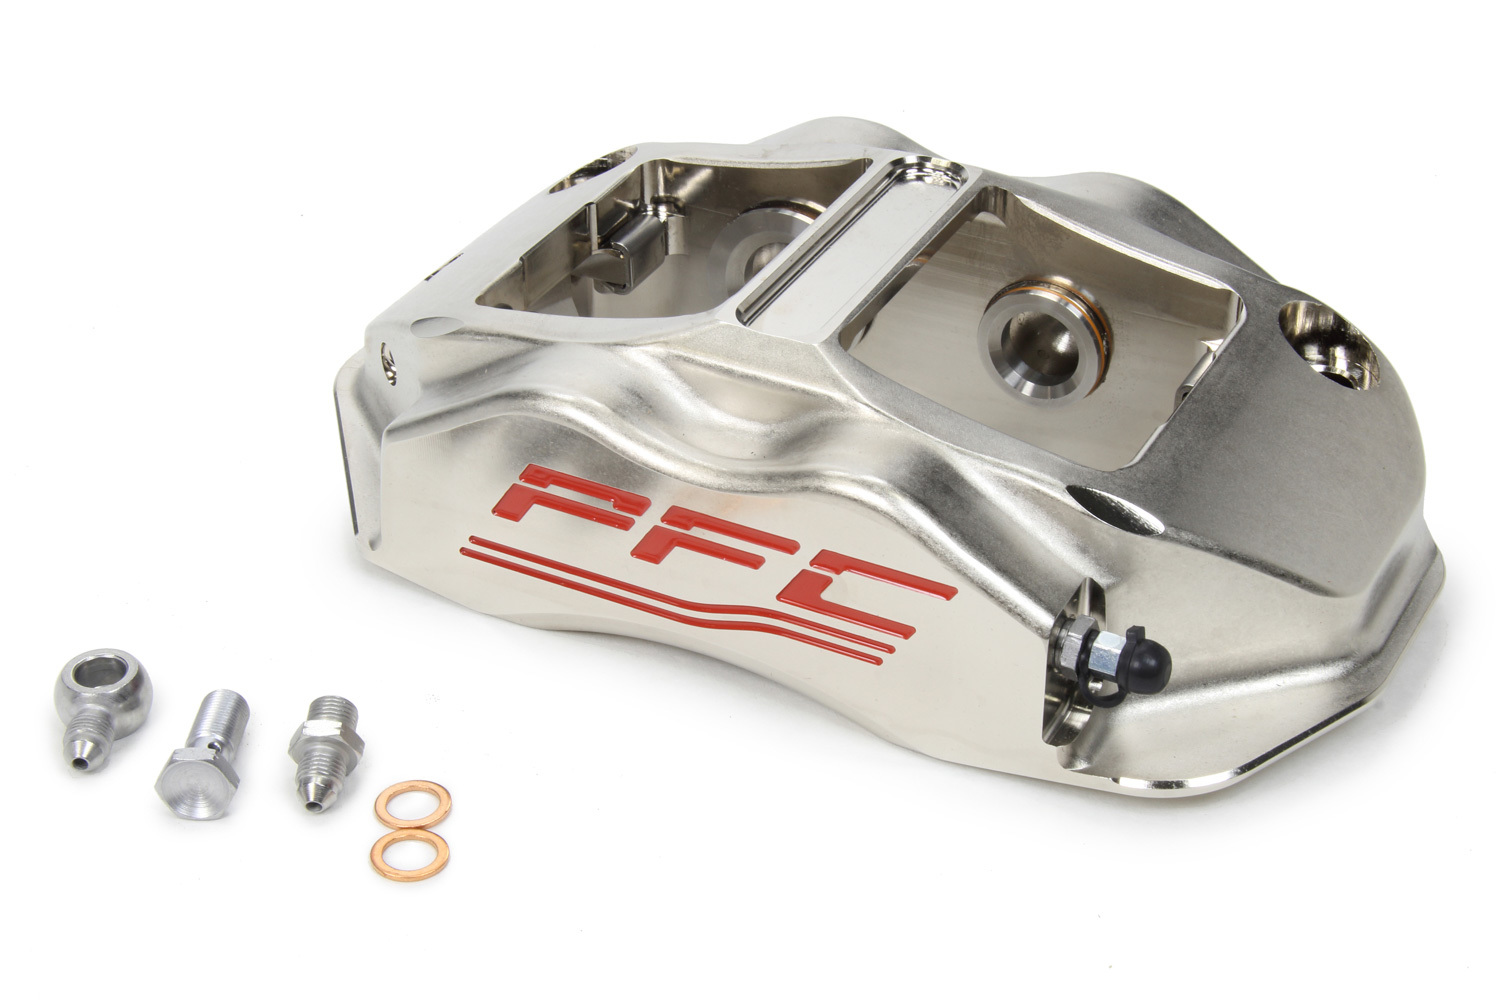 Performance Friction 94.323.290.365.12 Brake Caliper, ZR94, Passenger Side, Trailing, 4 Piston, Aluminum, Nickel Plated, 12.716 in OD, 1.250 in Thick Rotor, 7.00 in Radial Mount, Each